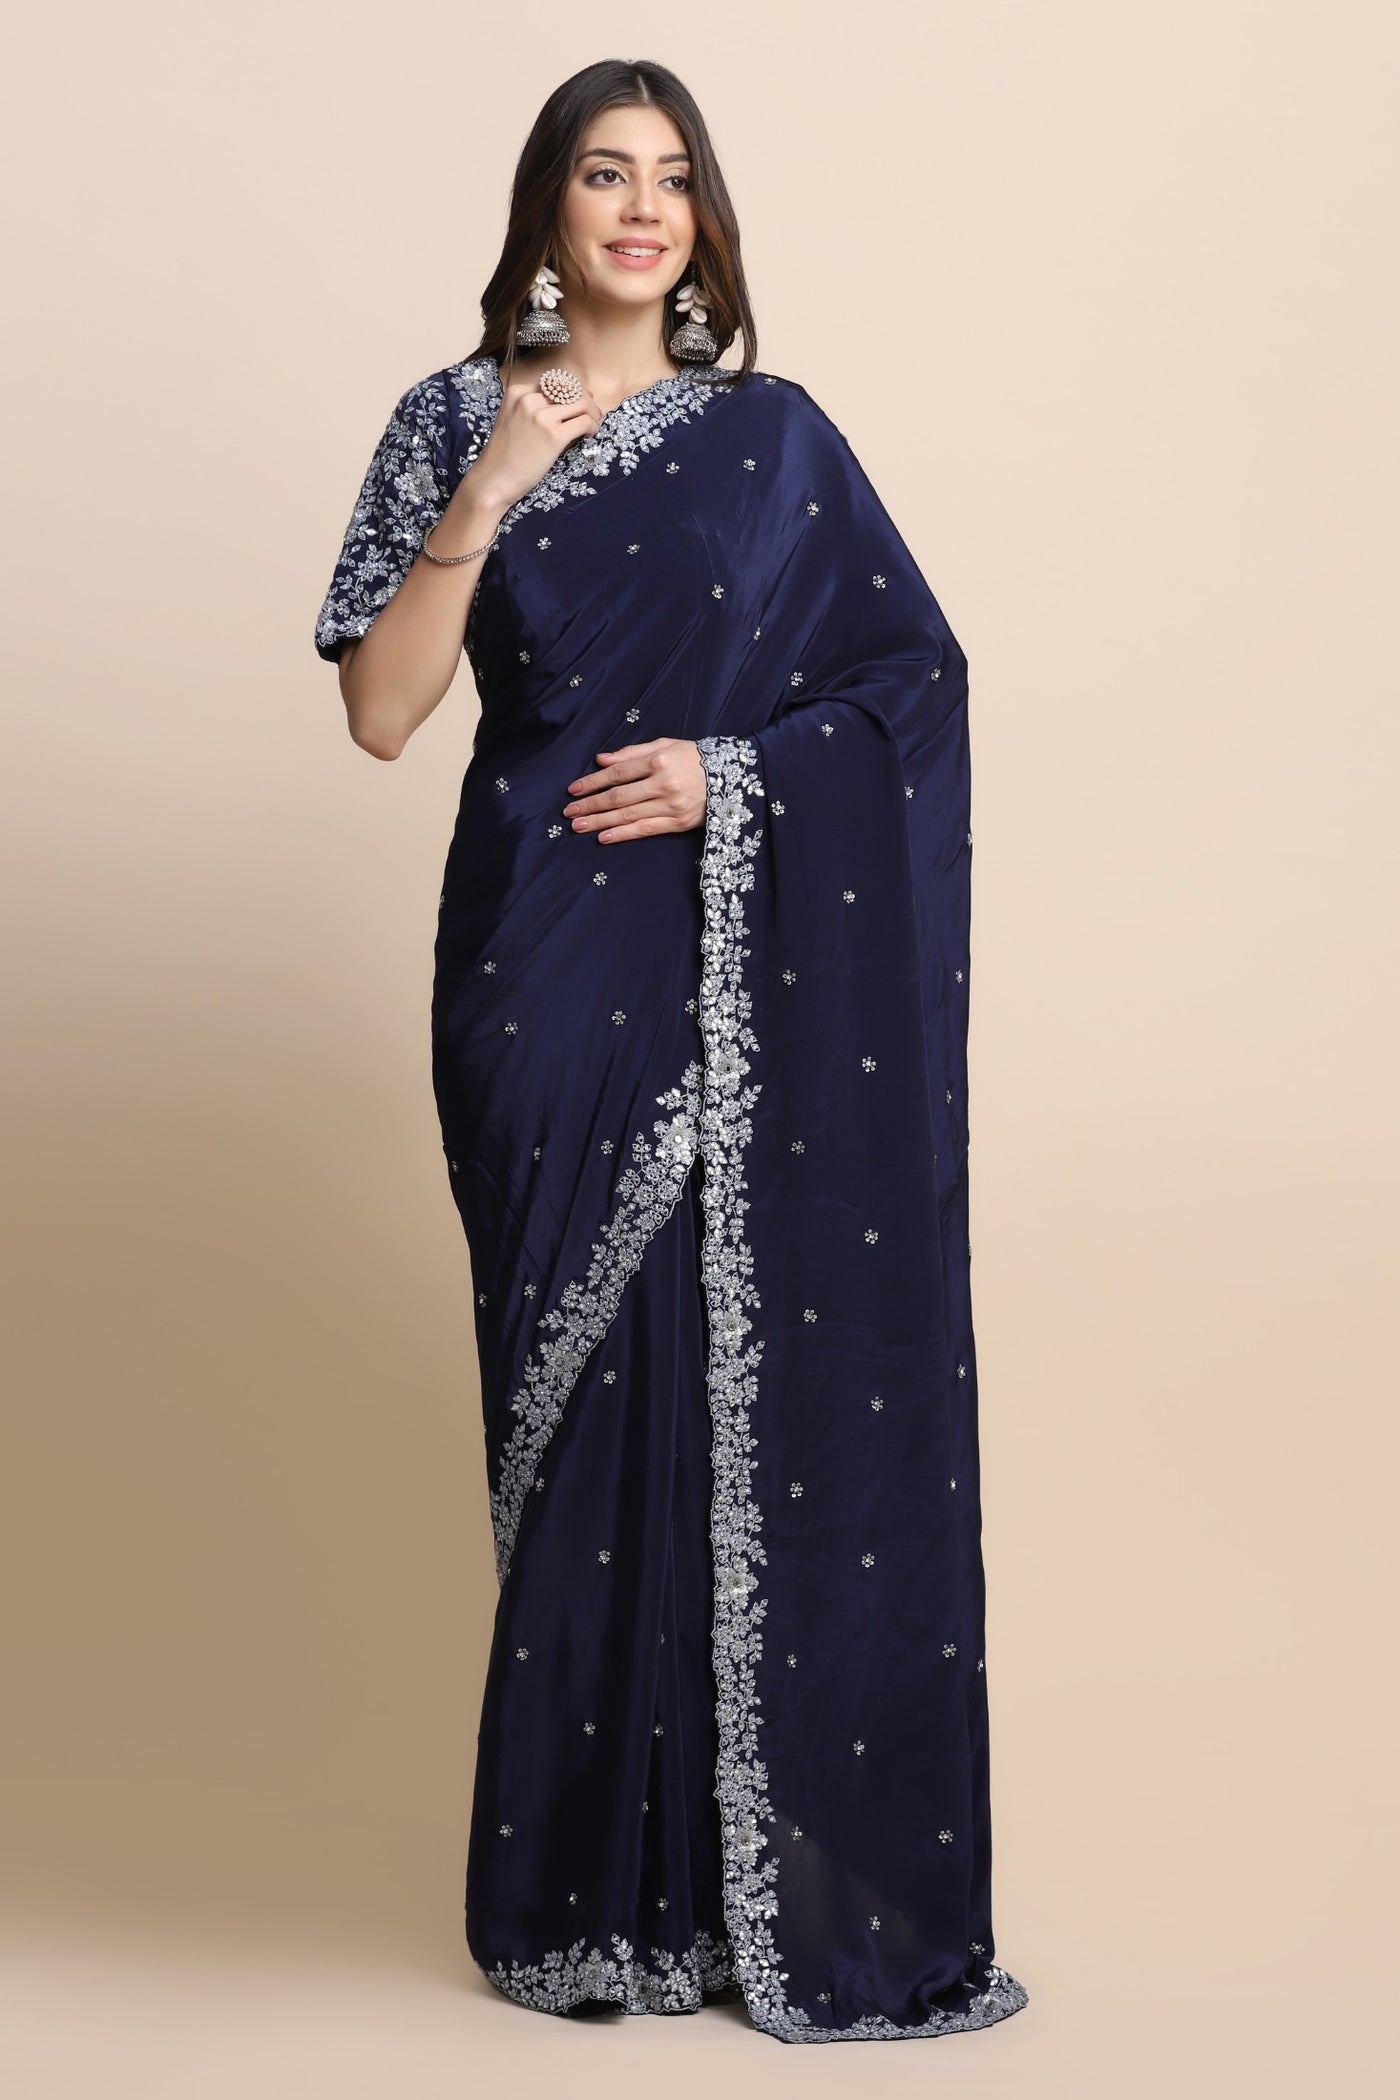 Glamorous royal blue color floral embroidered saree